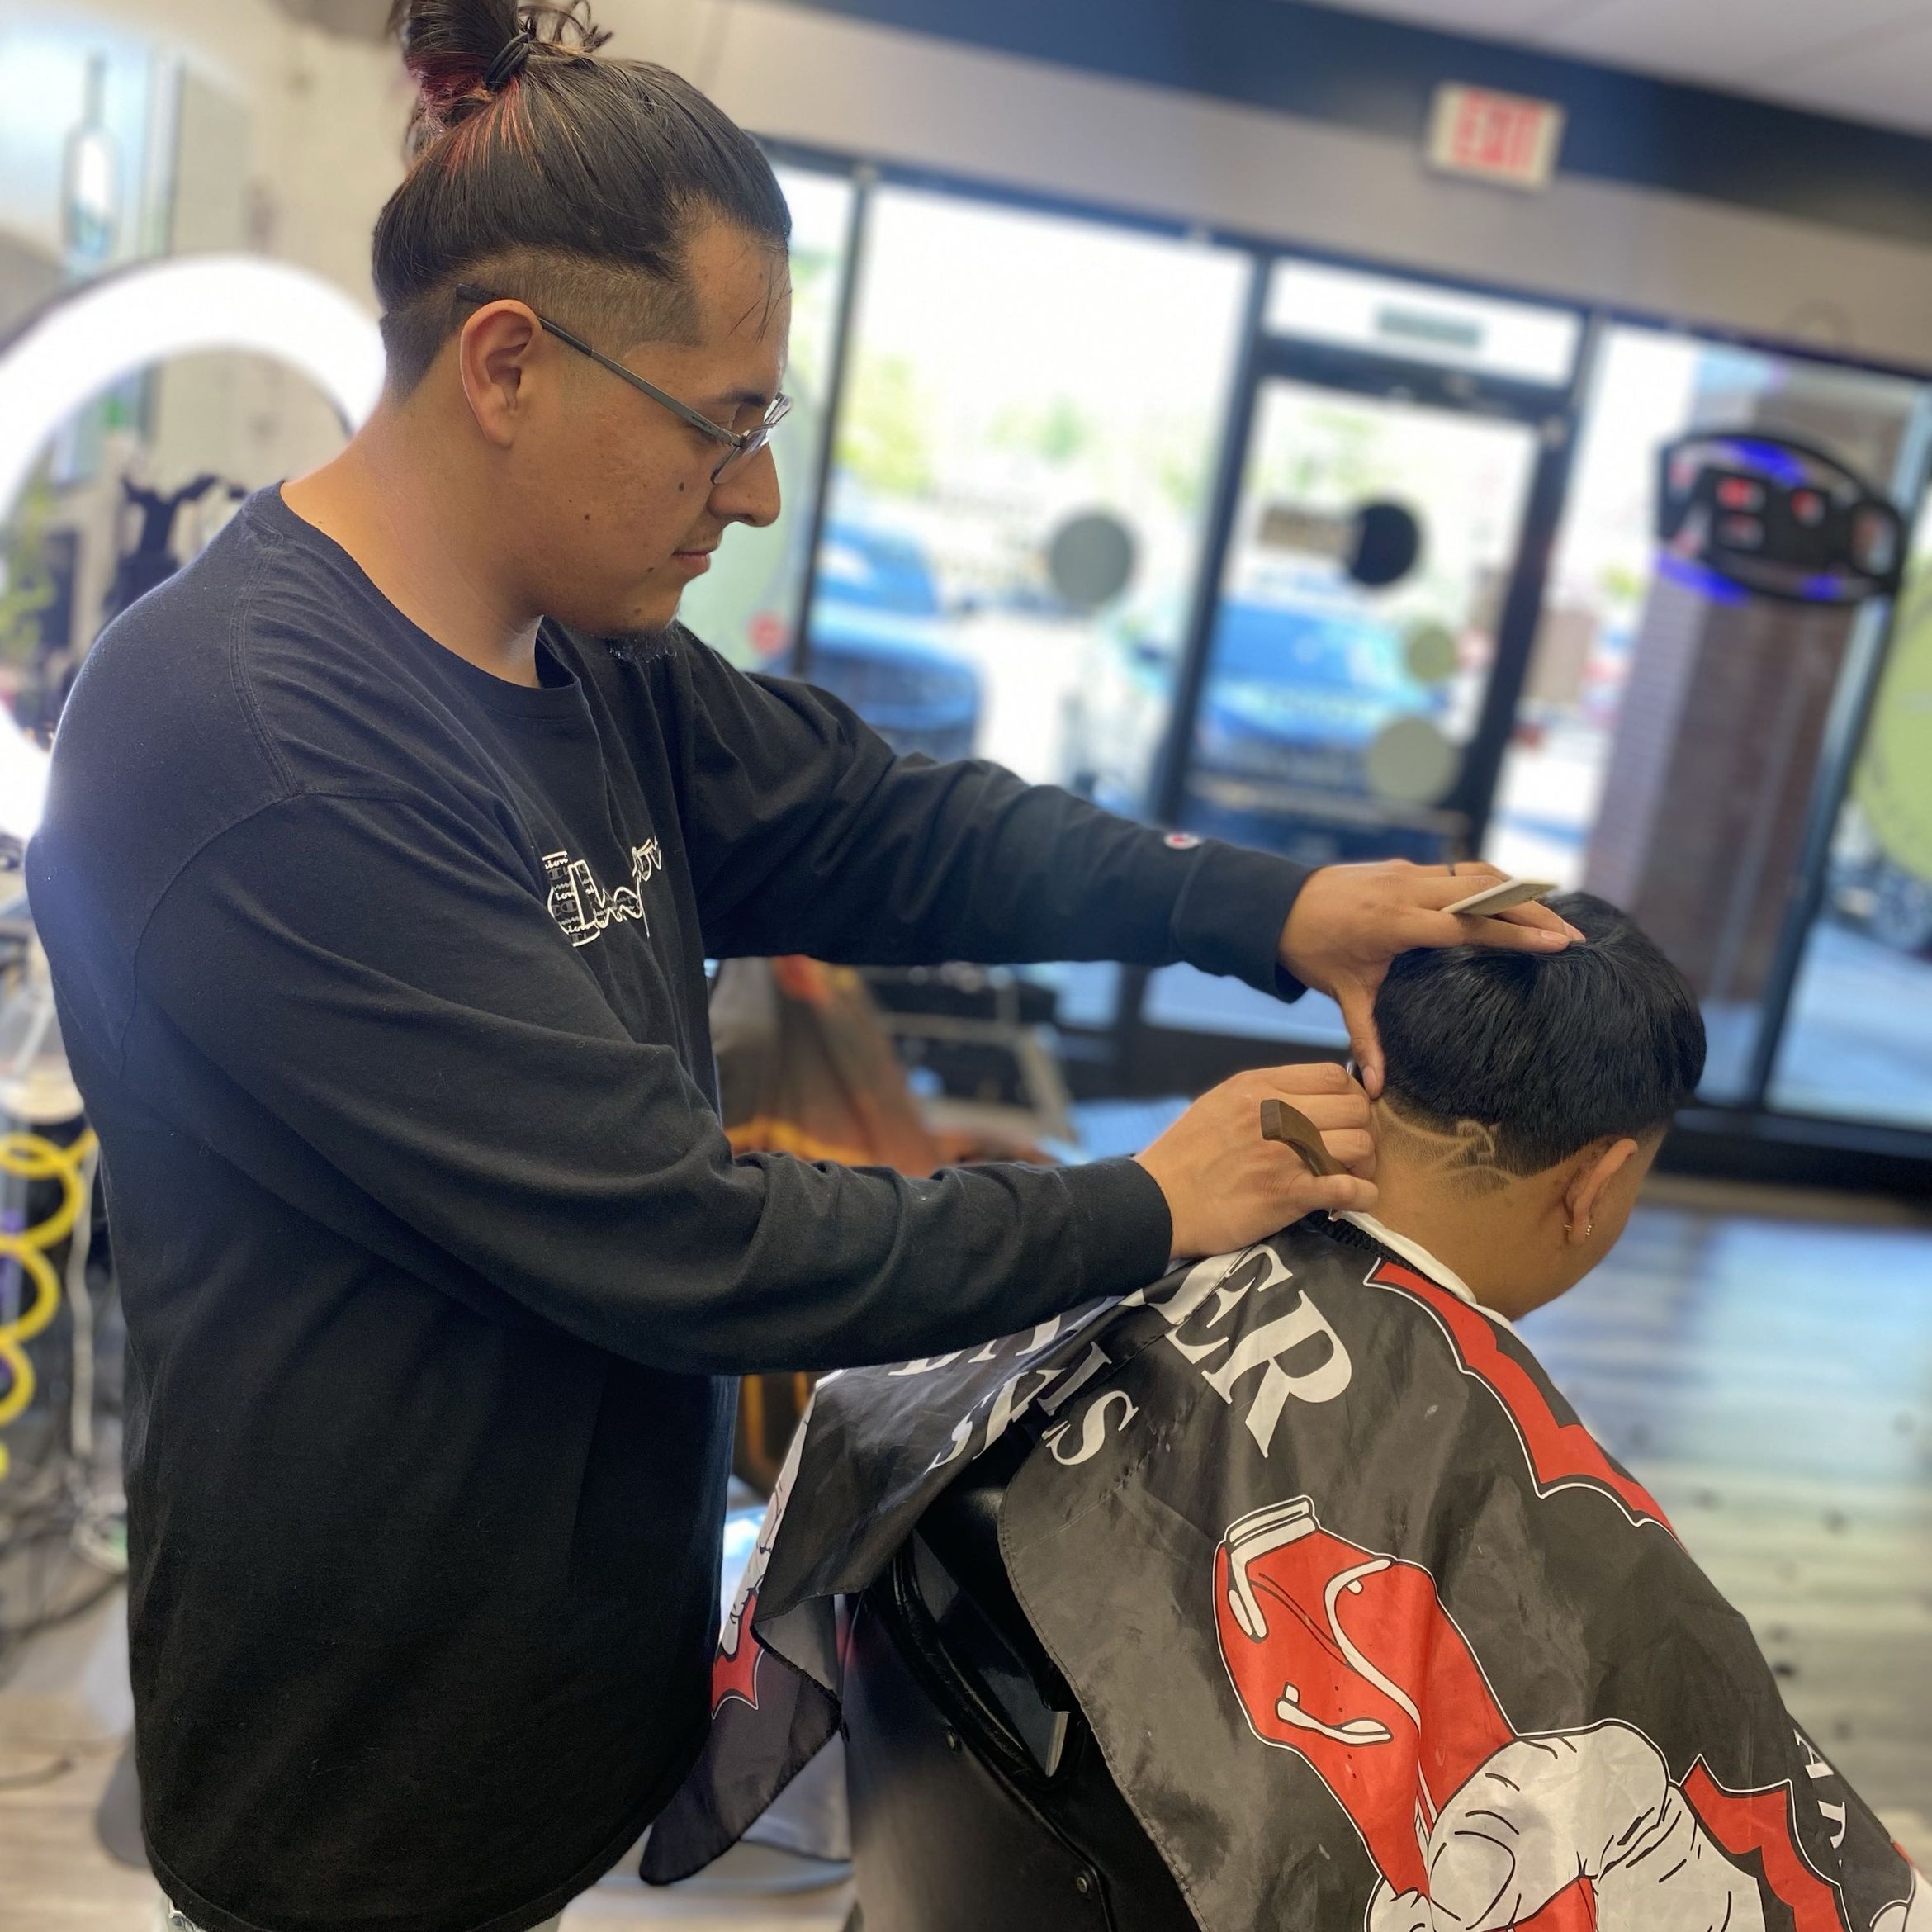 Edgar The Barber Them.clippers, 6323 Albermarle Road Charlotte nc, Unit, Charlotte, 28212